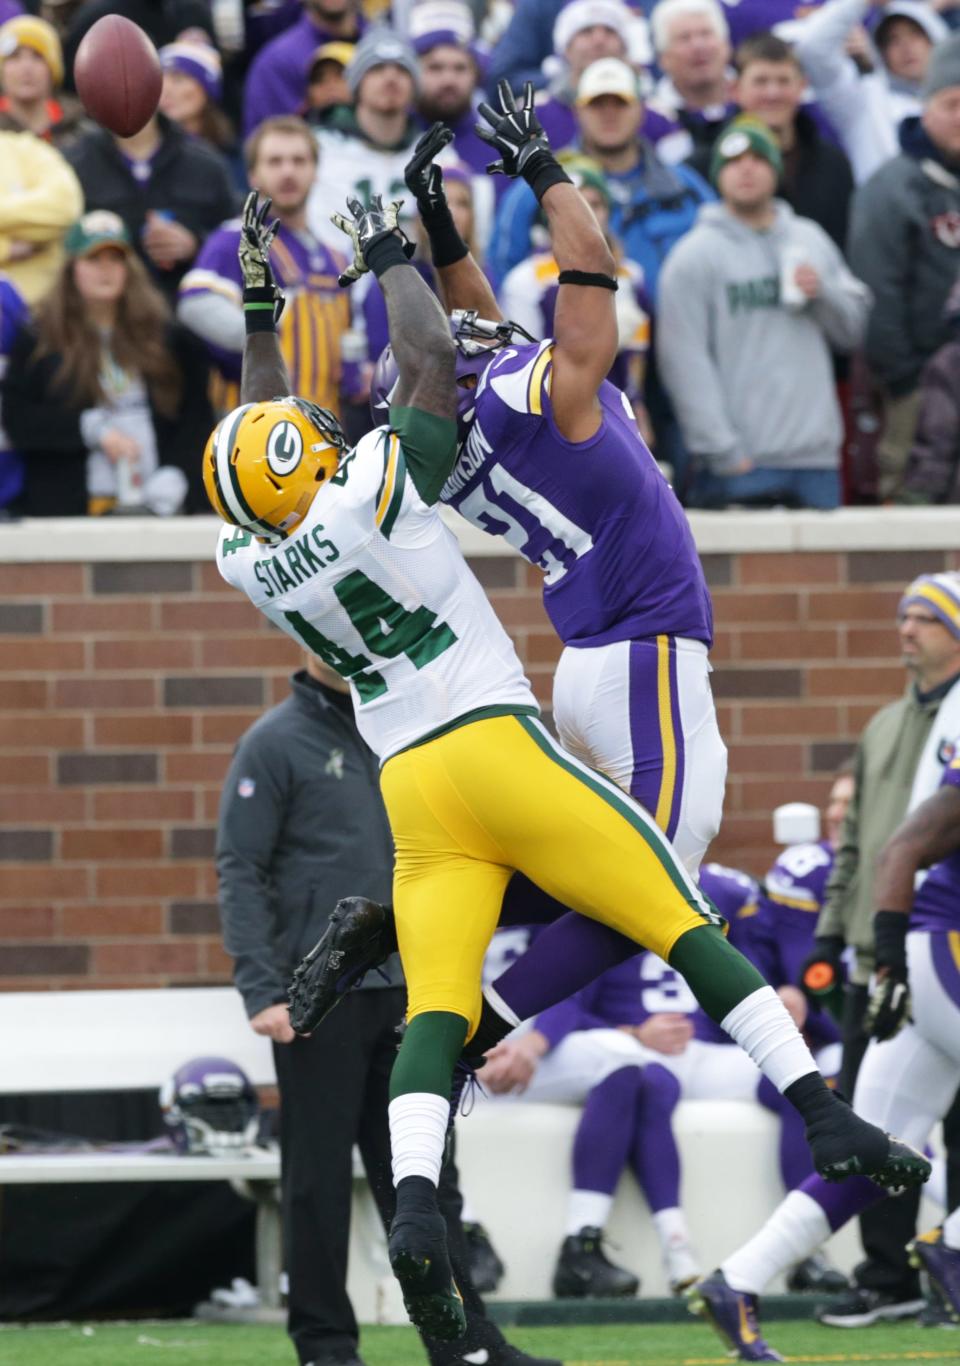 Minnesota Vikings cornerback Josh Robinson, right, breaks up a pass intended for Green Bay Packers running back James Starks (44) during the second half of an NFL football game, Sunday, Nov. 23, 2014, in Minneapolis. (AP Photo/Jim Mone)